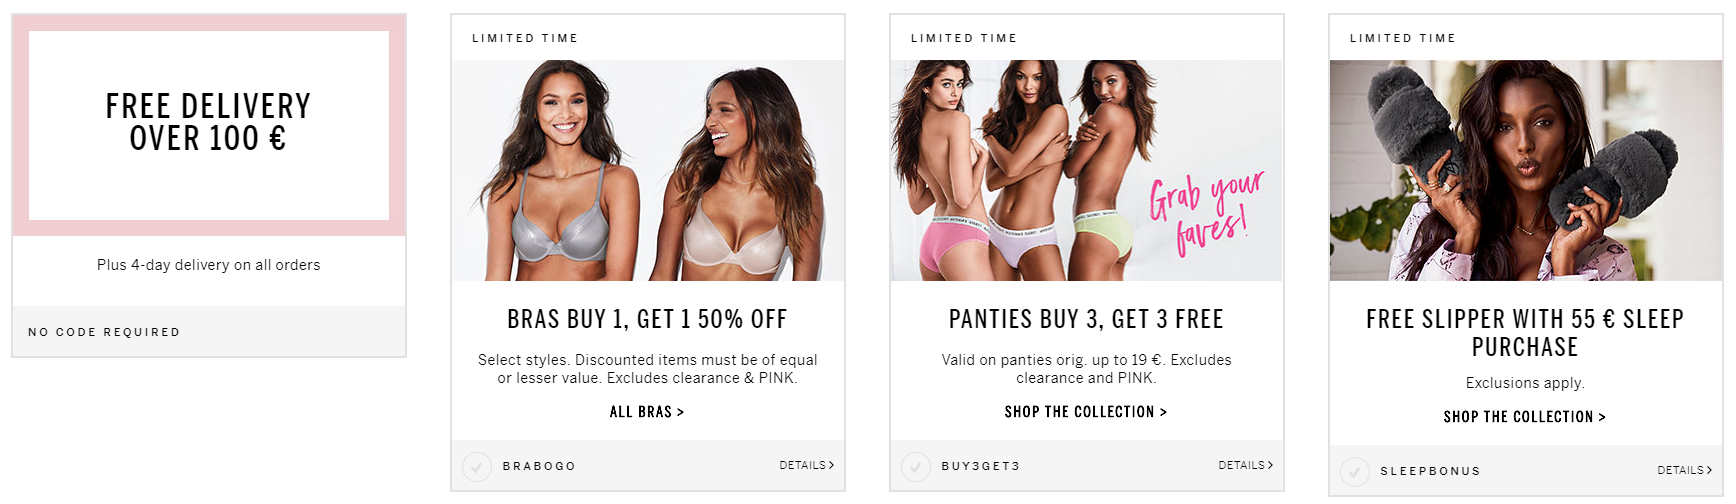 BBW and Victoria's Secret To Split: Key Insights from the L Brands Investor  Day